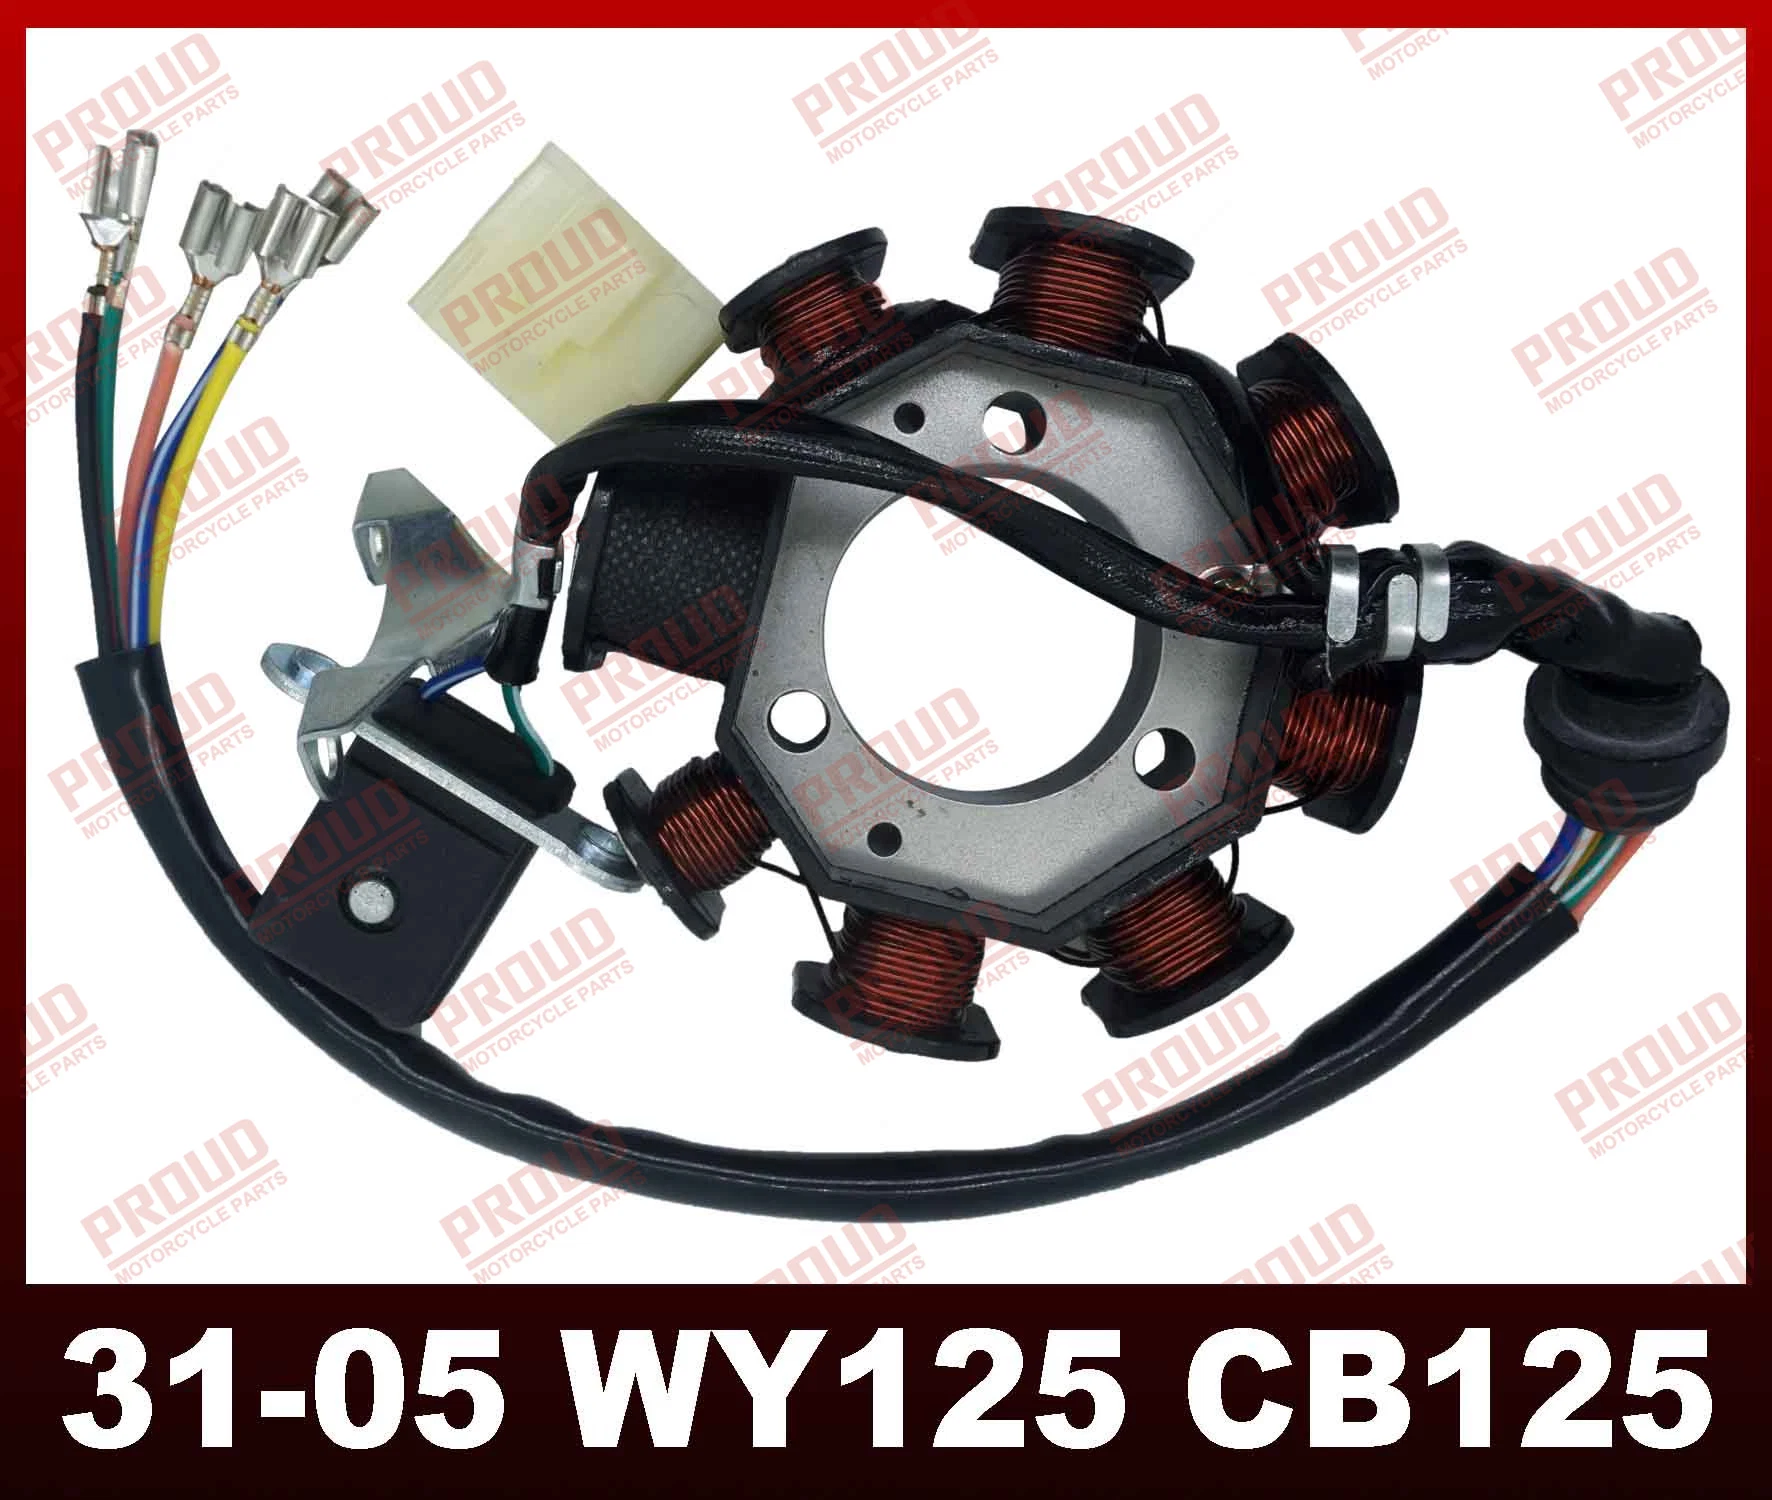 Wy125/CB125 Magneto Coil High Quality Motor Spare Parts Motorcycle Parts